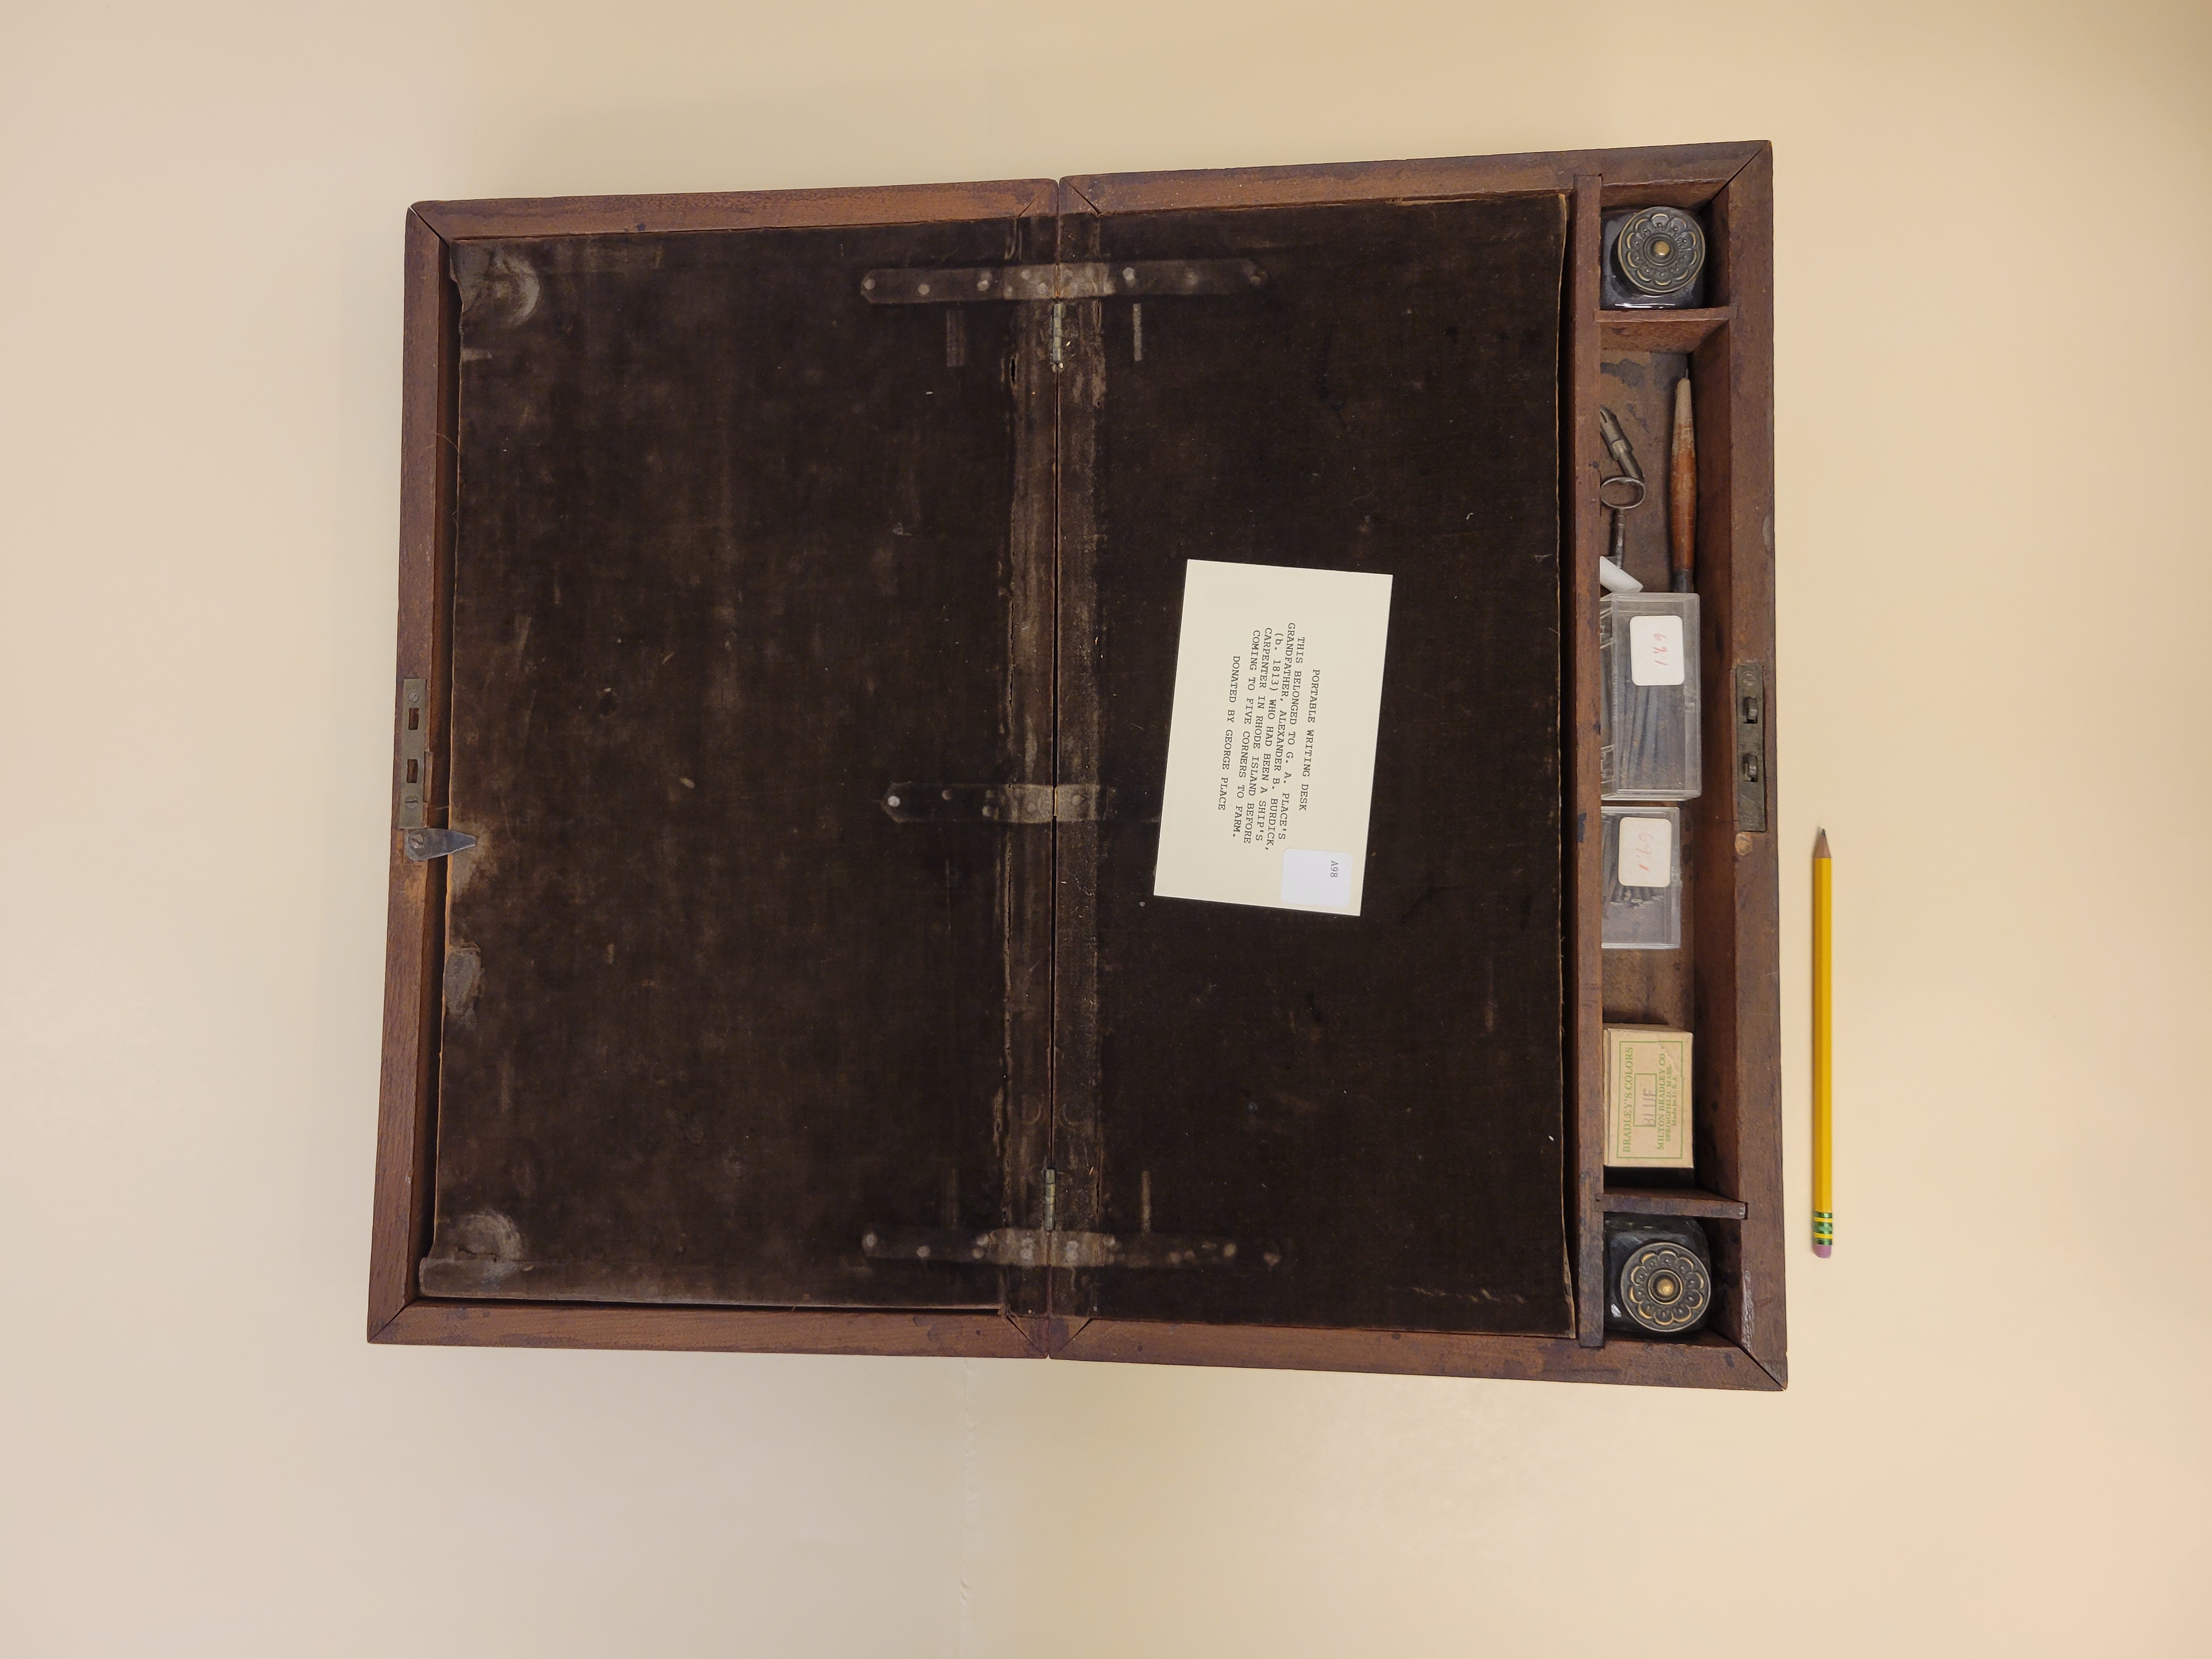 Image of an early portable travel desk opened up